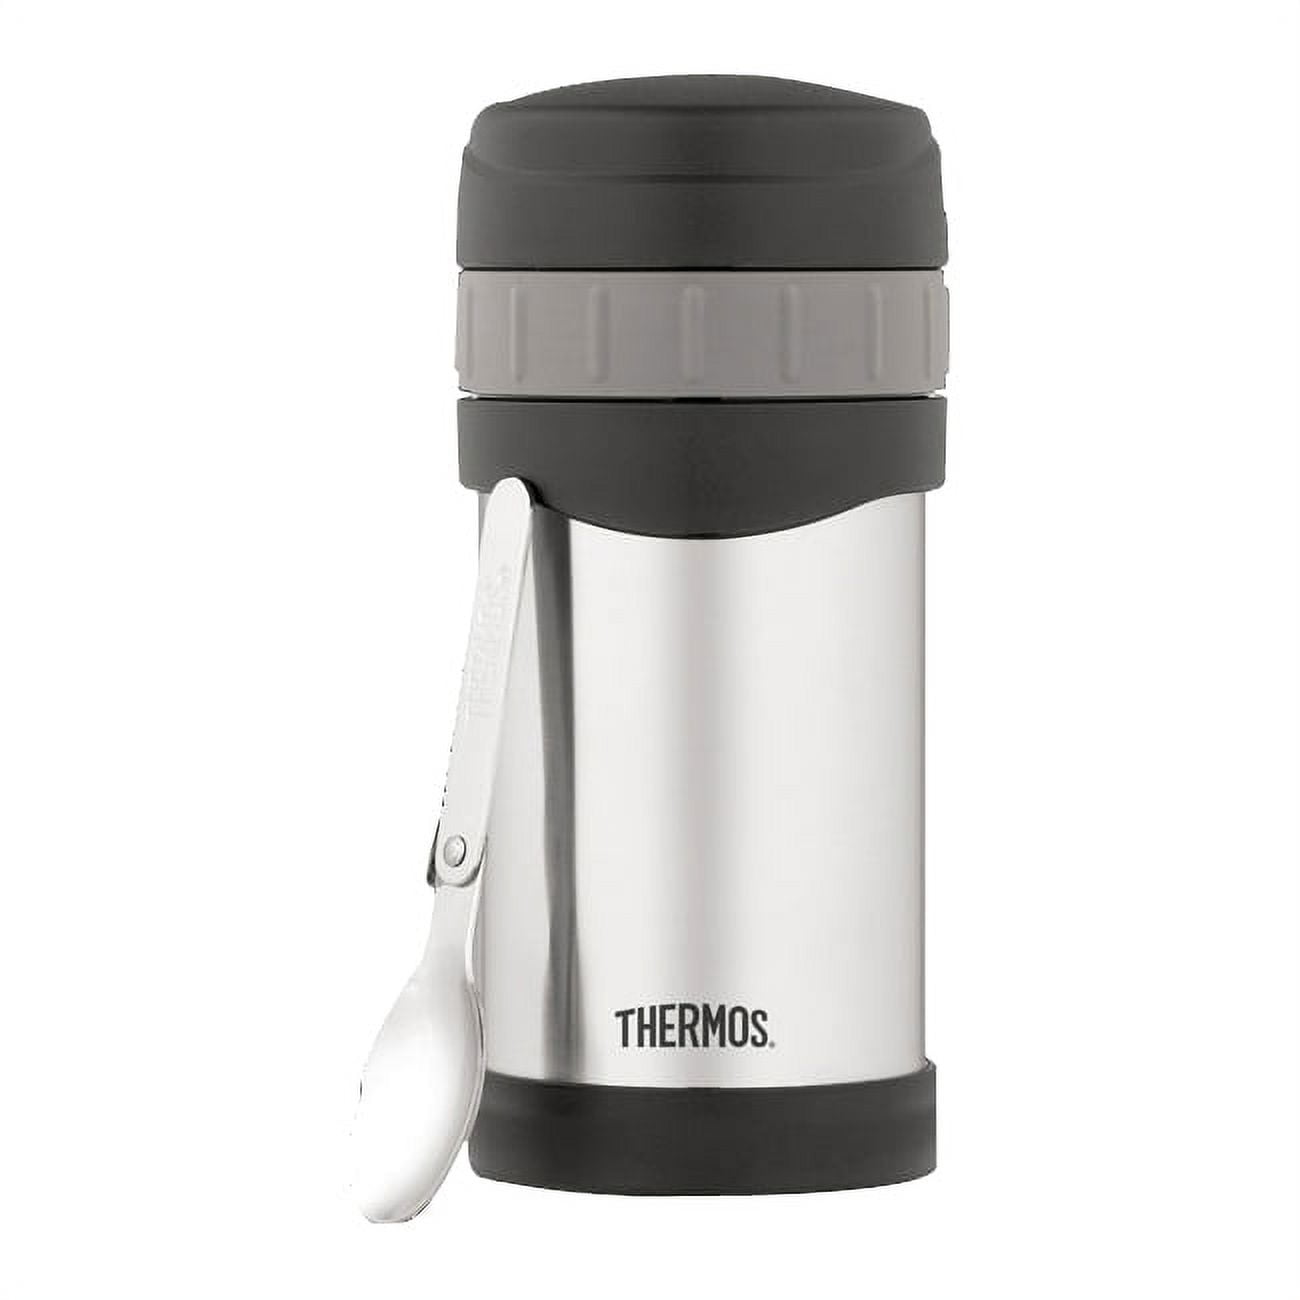 Thermos Food Jar Wide Mouth Insulated Stainless Steel 10 oz - 1 ea